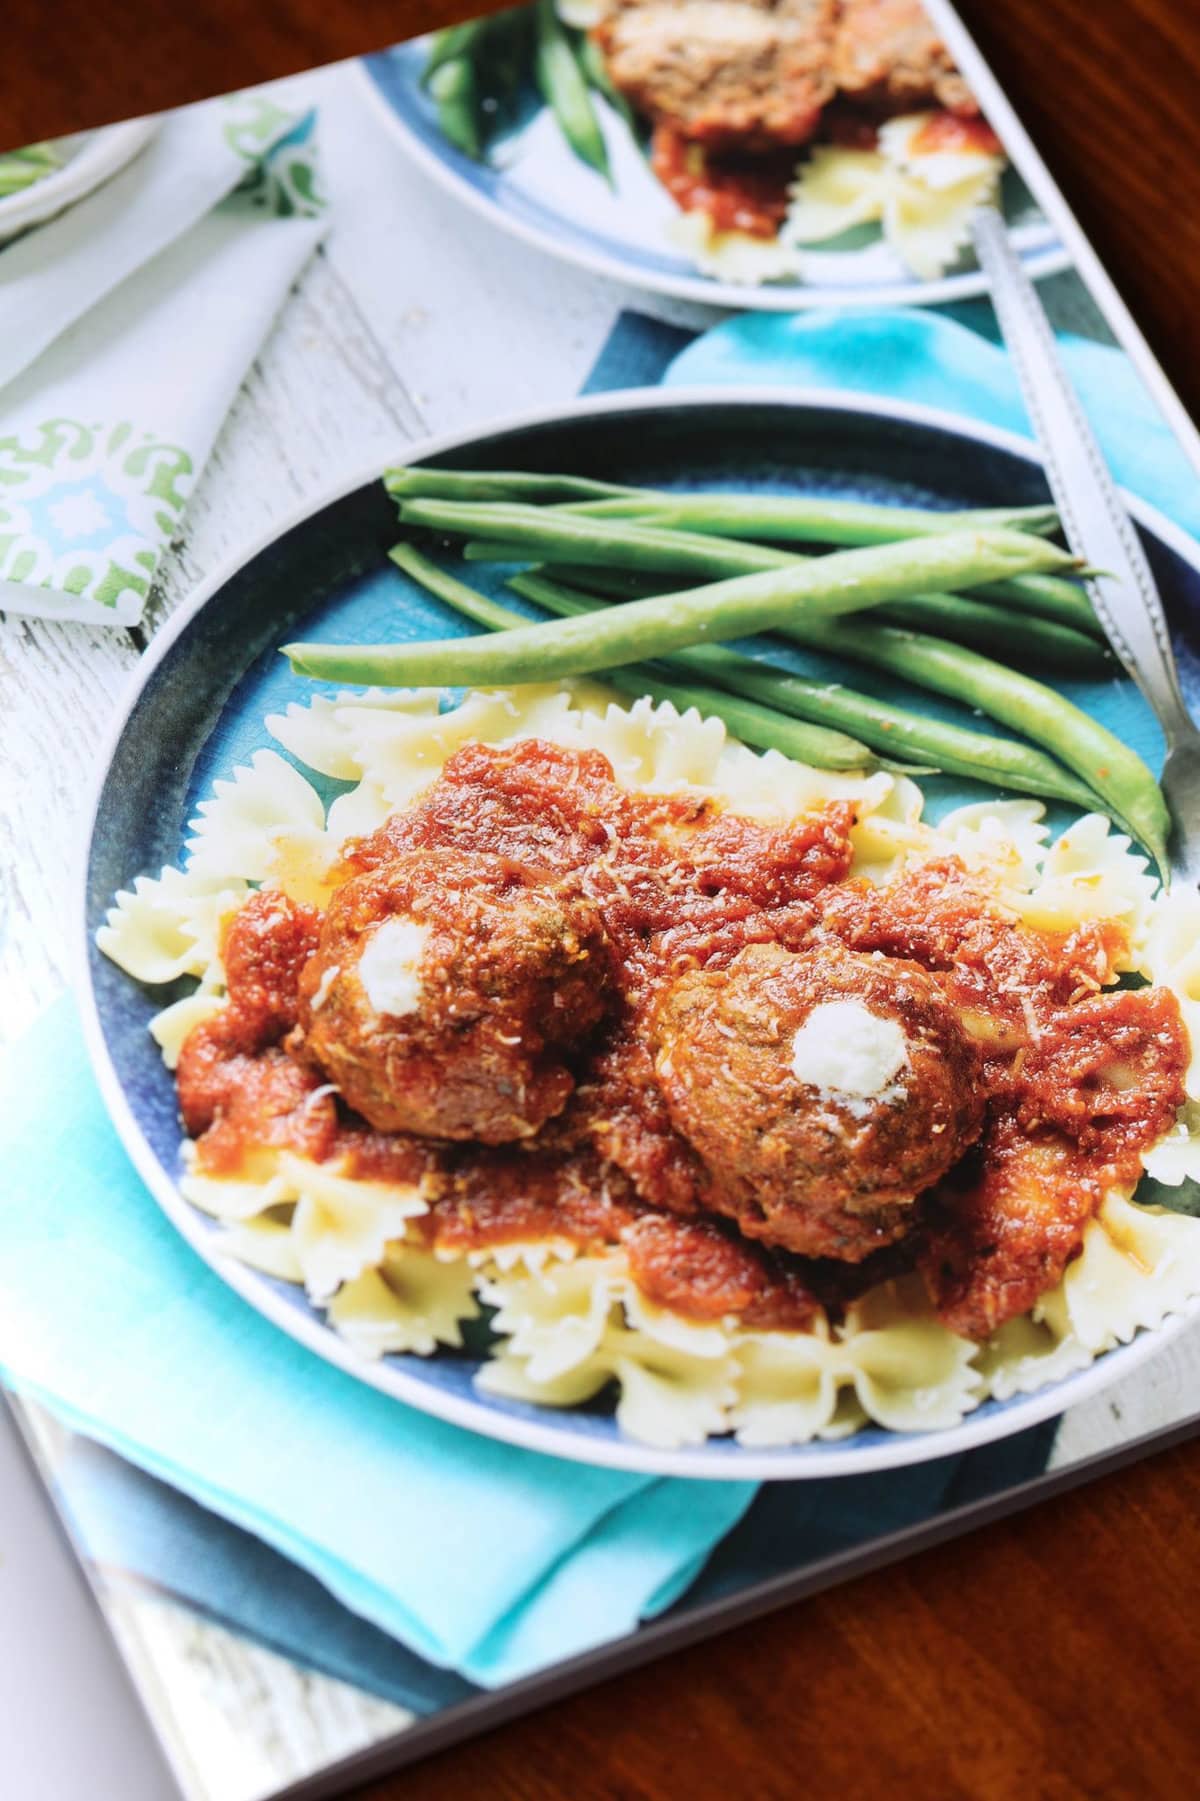 Slow cooker ricotta stuffed meatballs served over pasta on a plate, with a bite missing from one meatball.